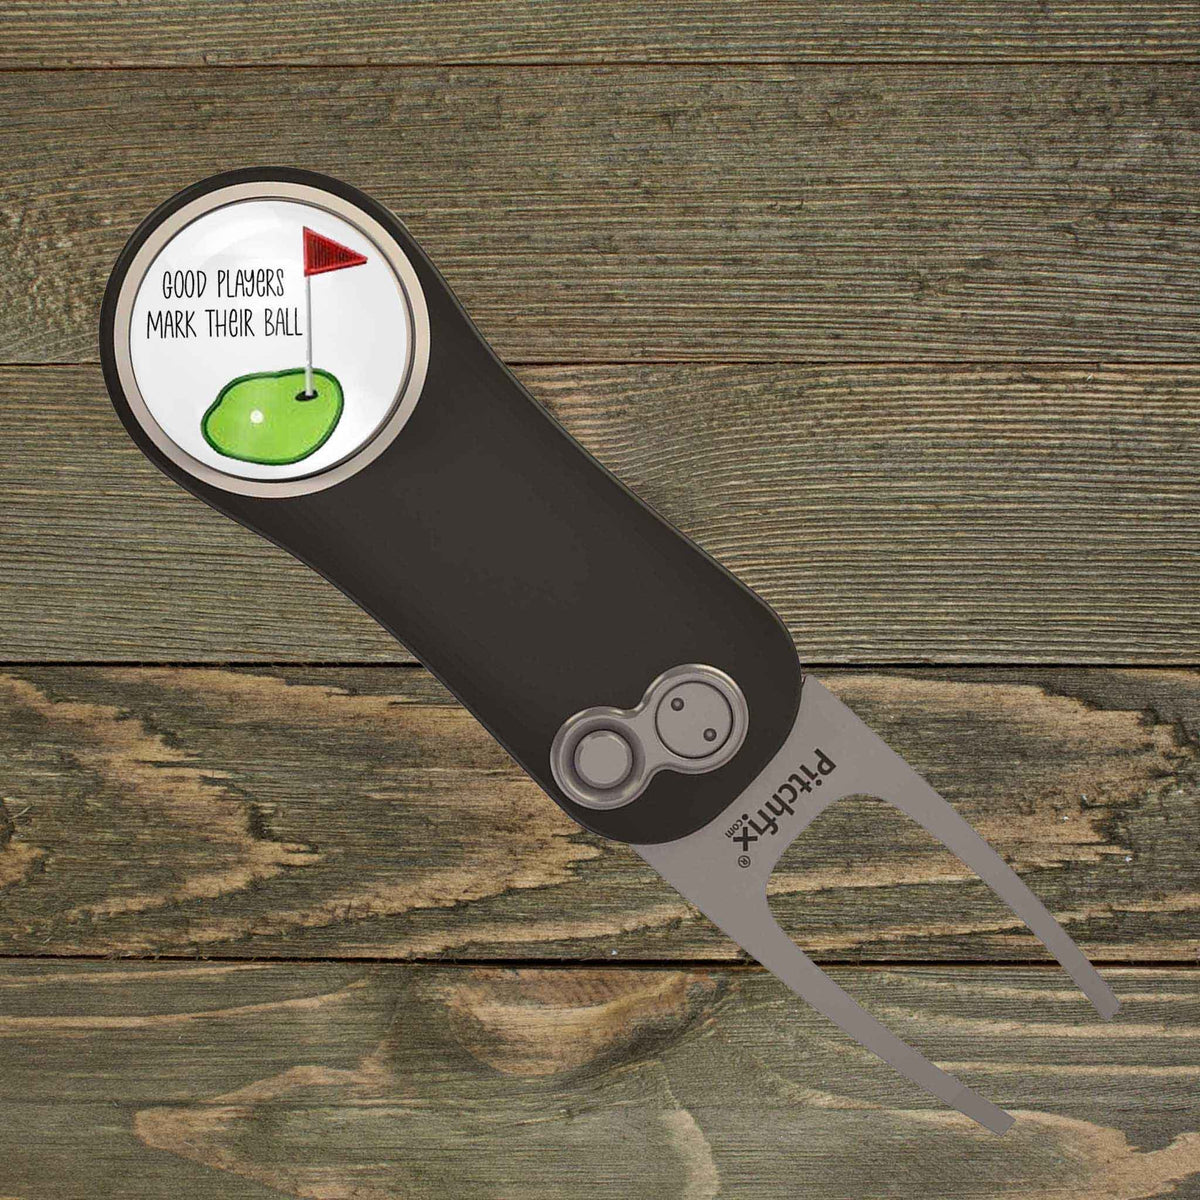 Personalized PitchFix Divot Tool | Golf Accessories | Golf Gifts | Good Players Mark Their Ball